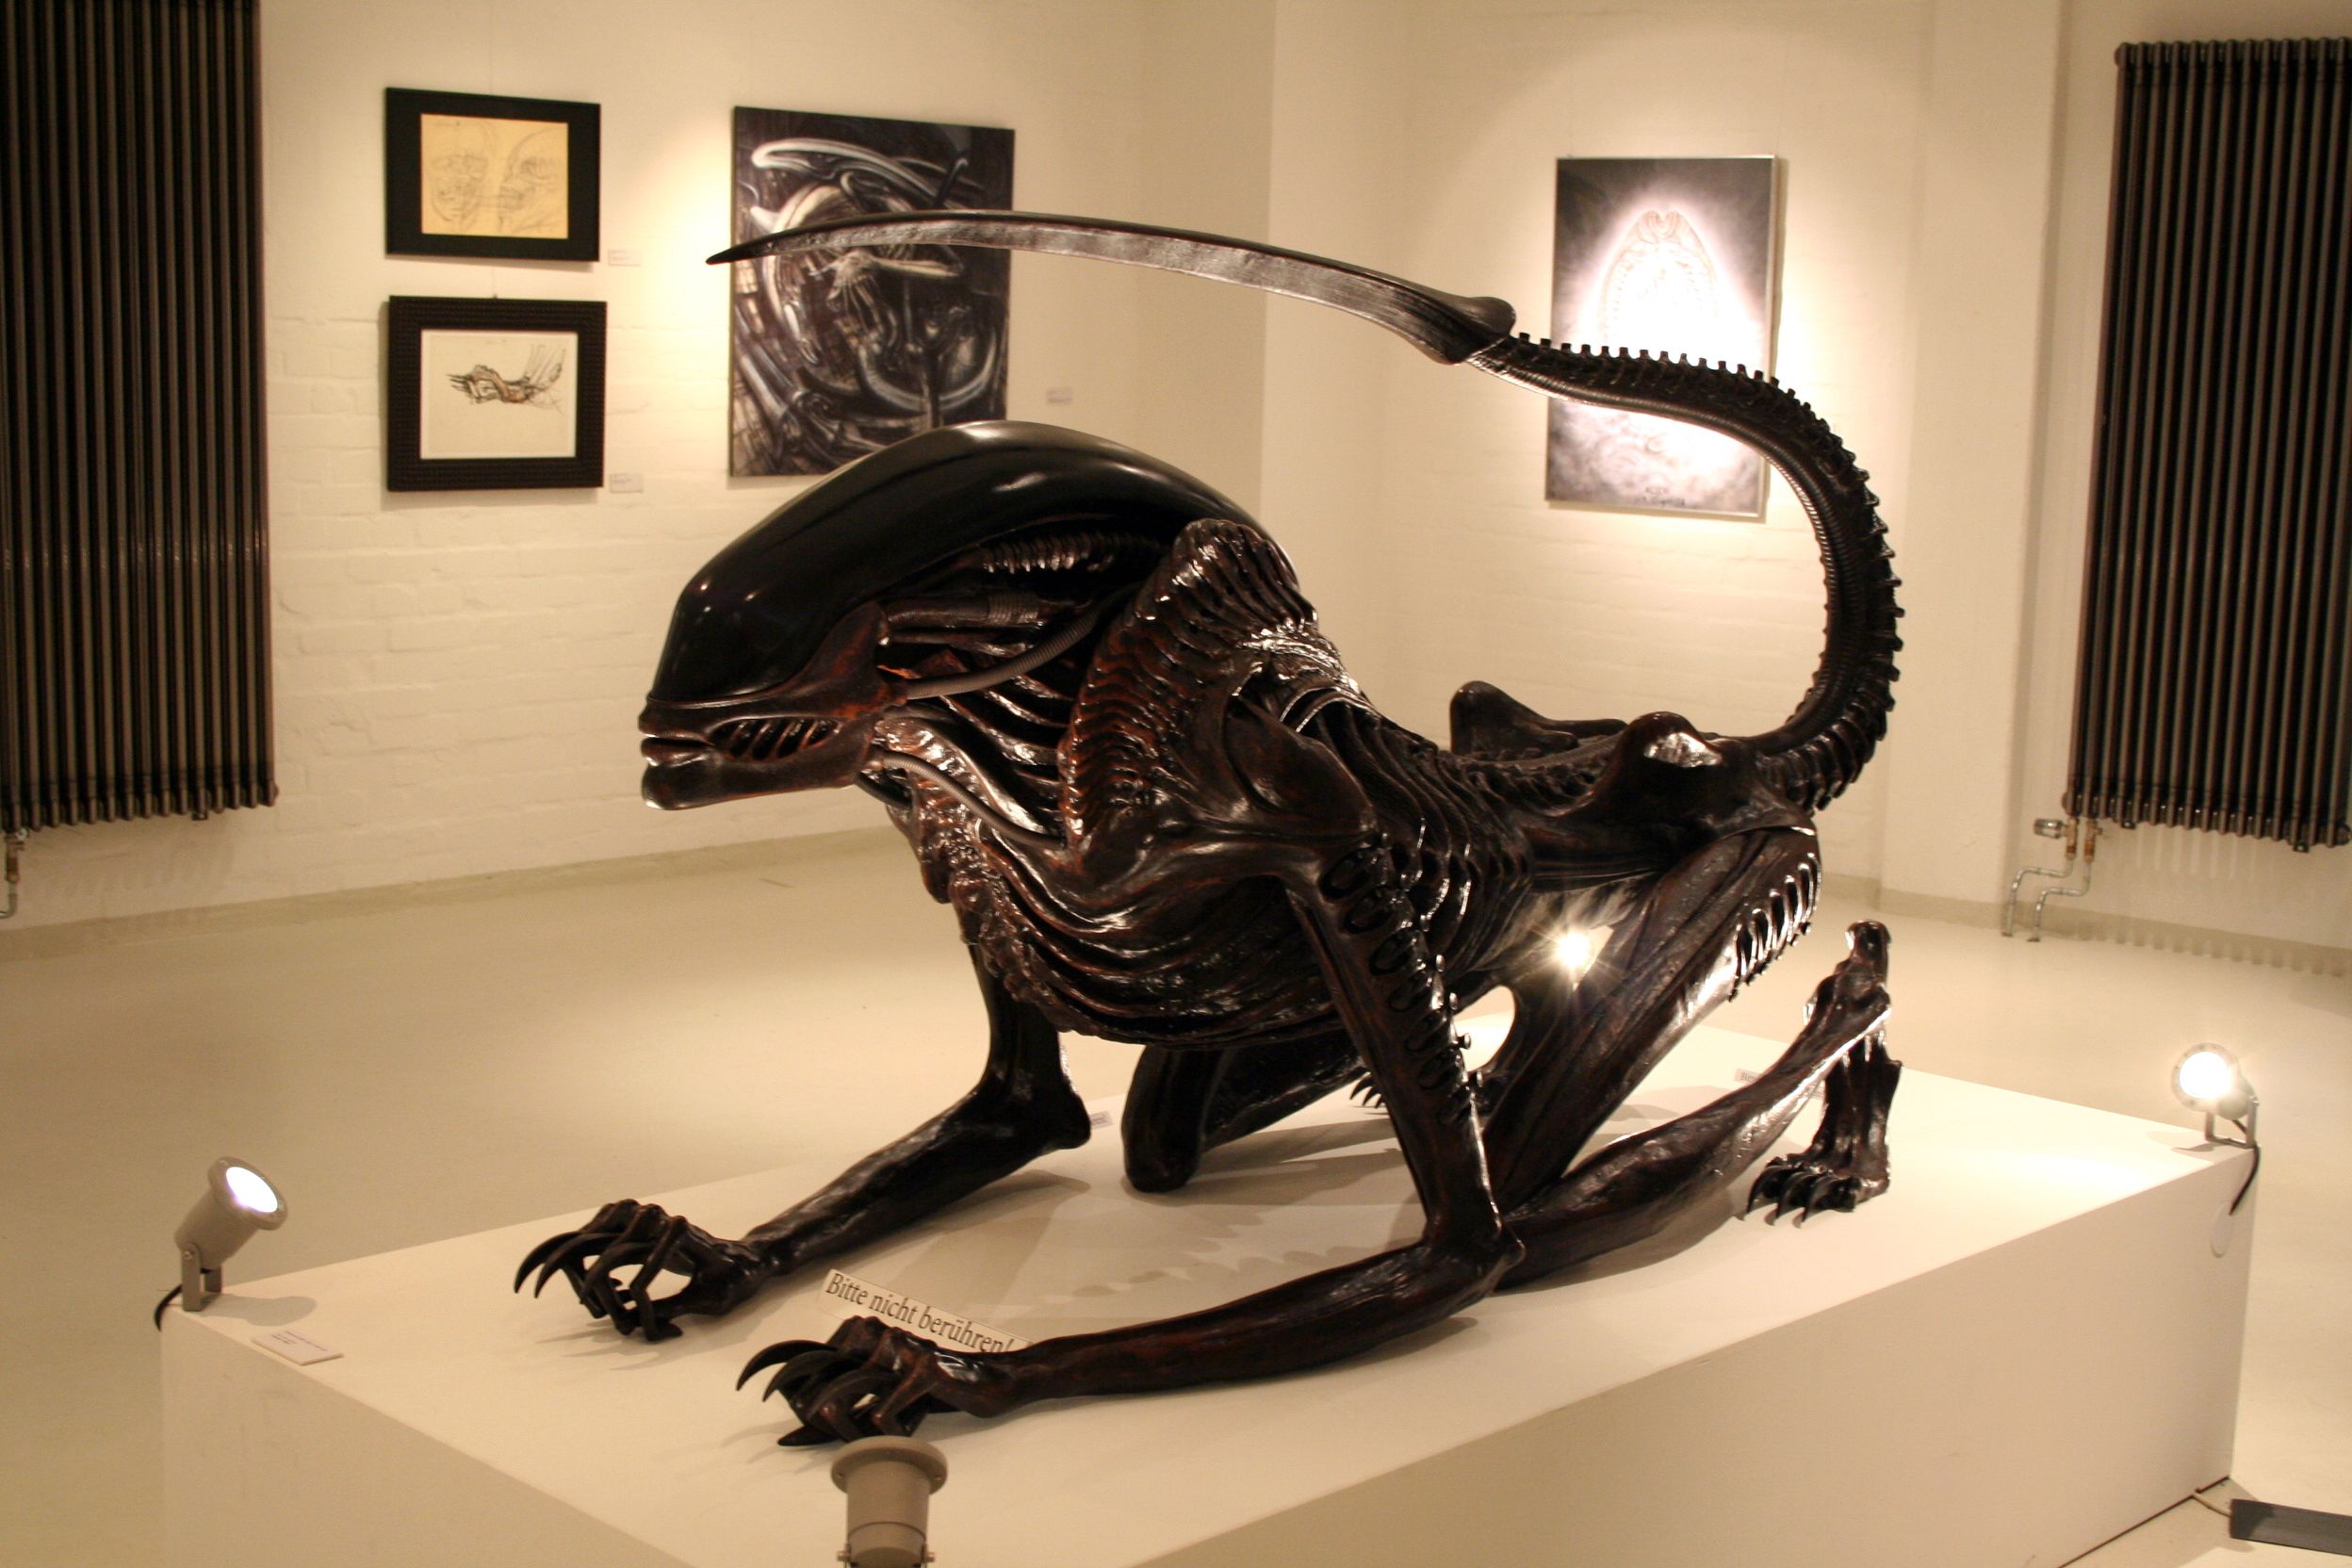 Iconic H.R. Giger 'Alien' Sculpture to be Fractionalized as NFTs